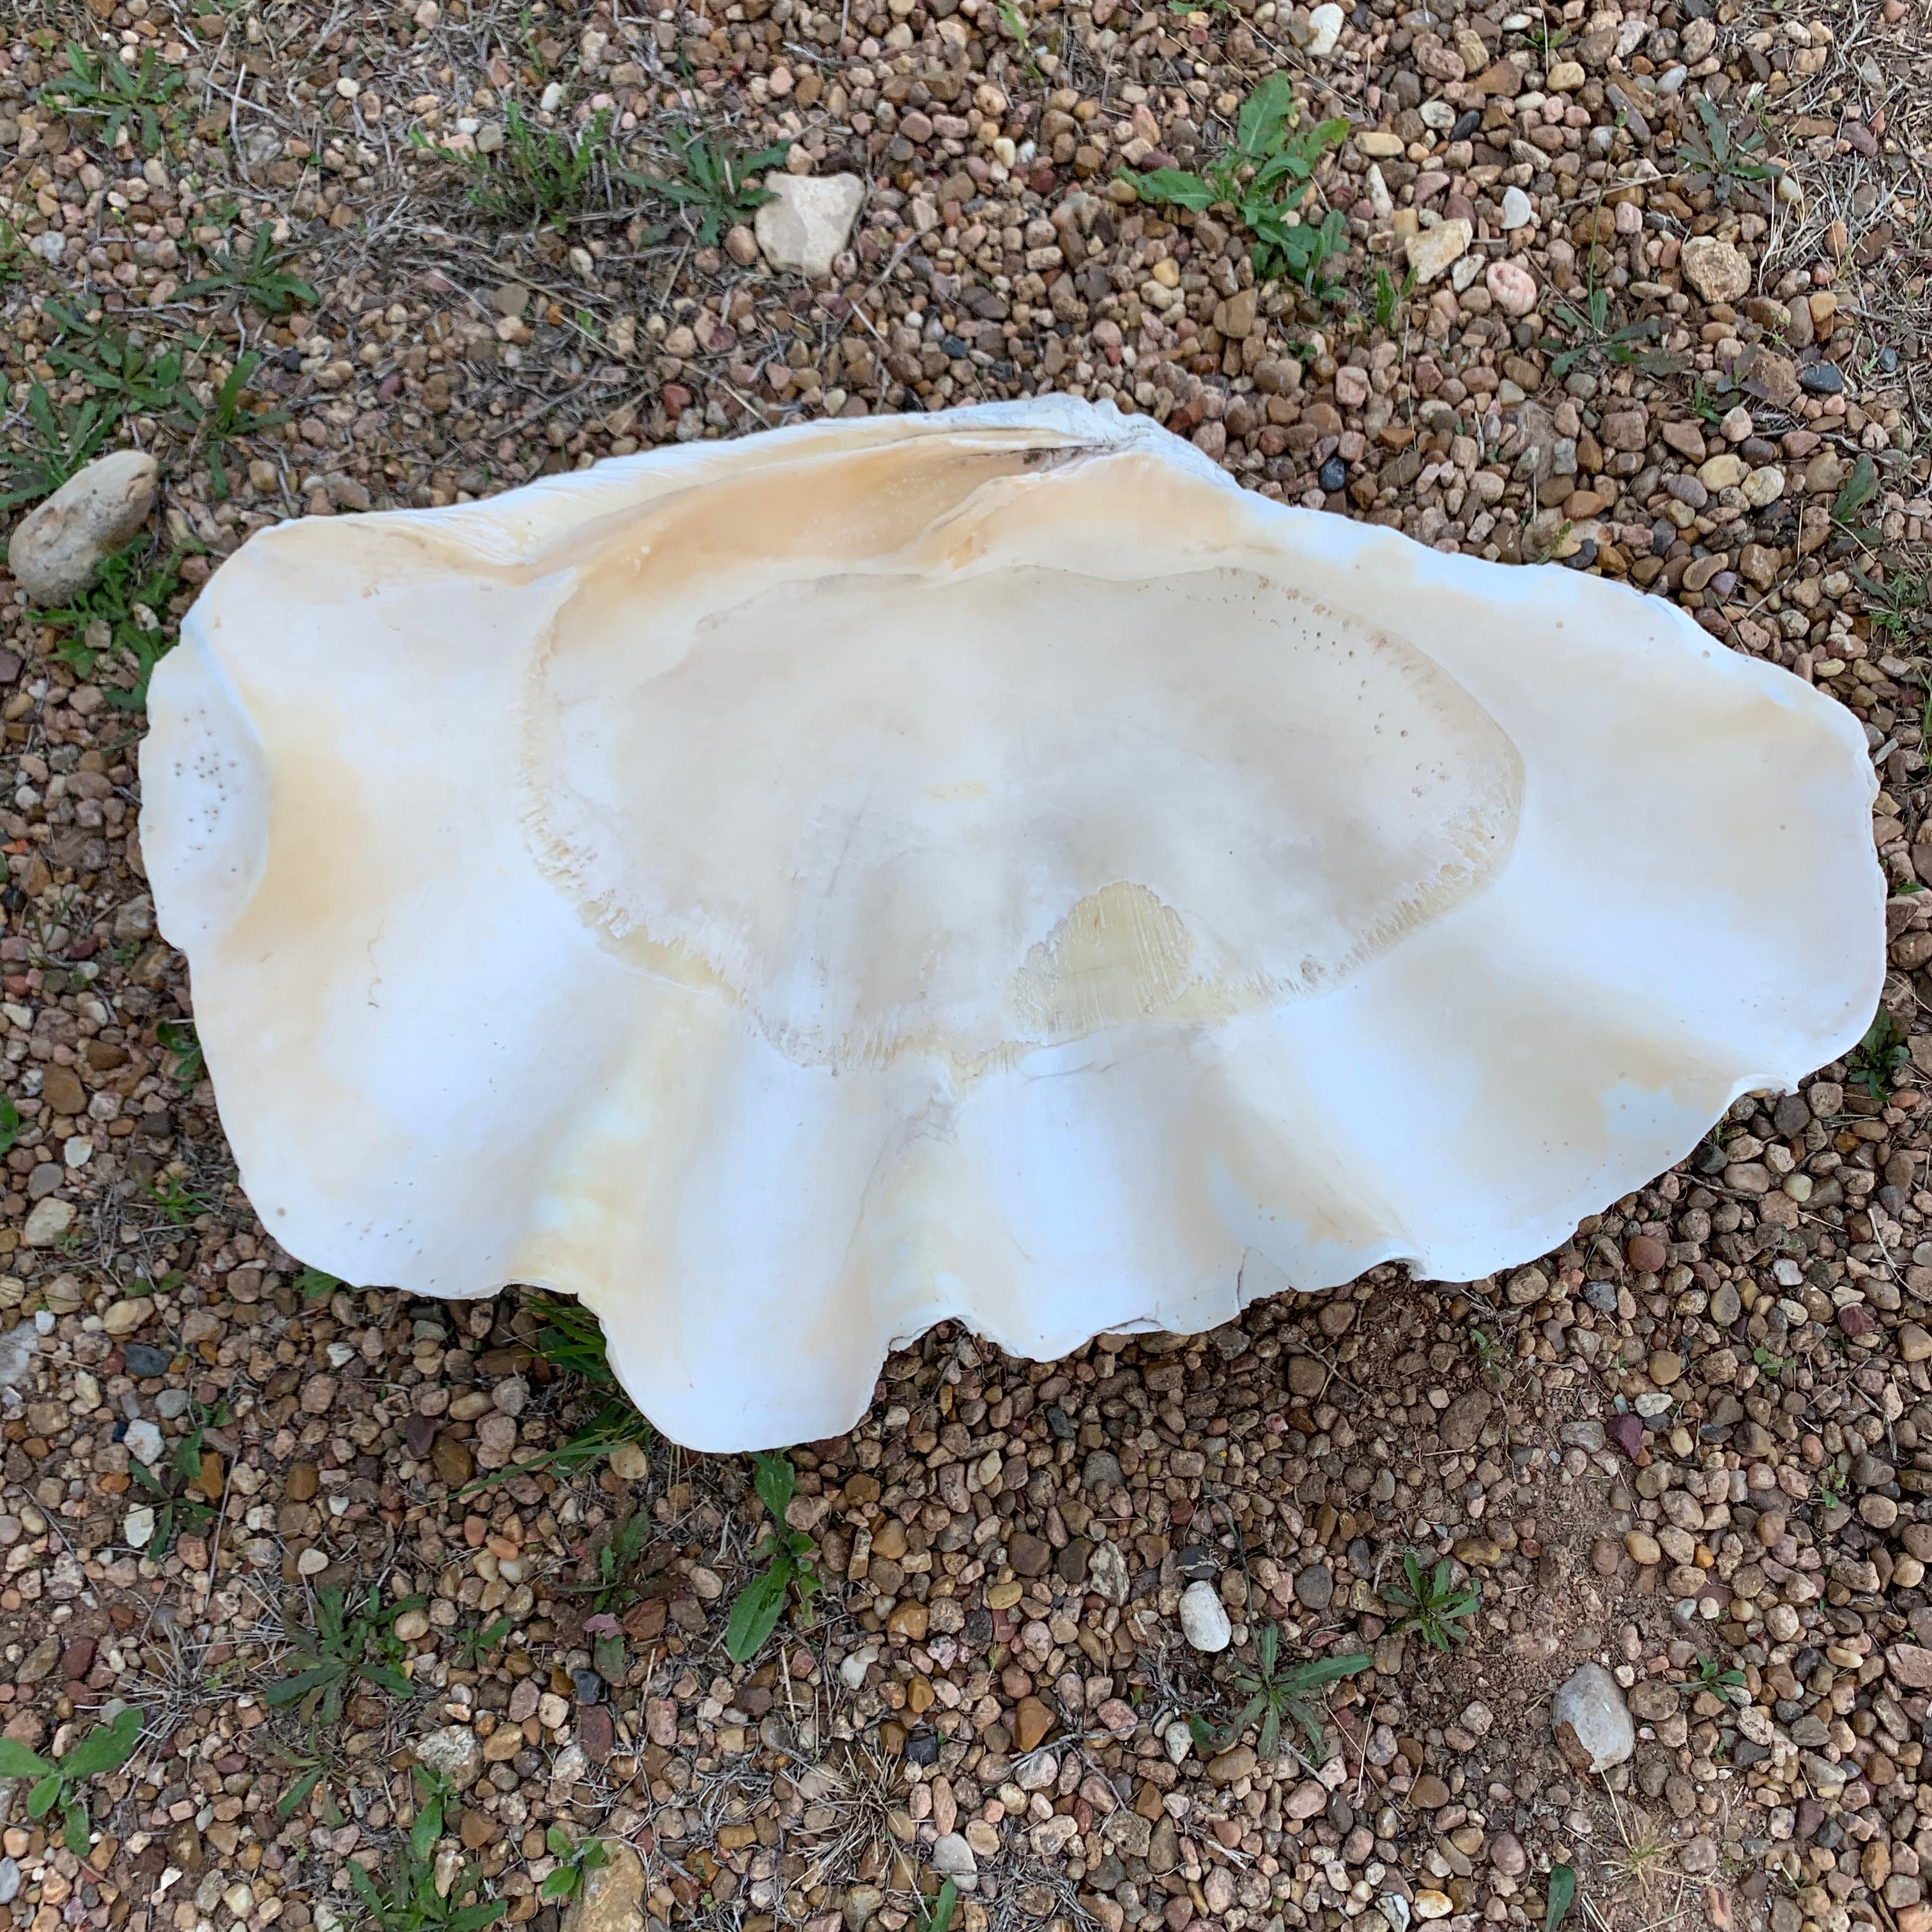 Mid Size South Pacific Tridacna Gigas Clam Shell with High Elbows 10